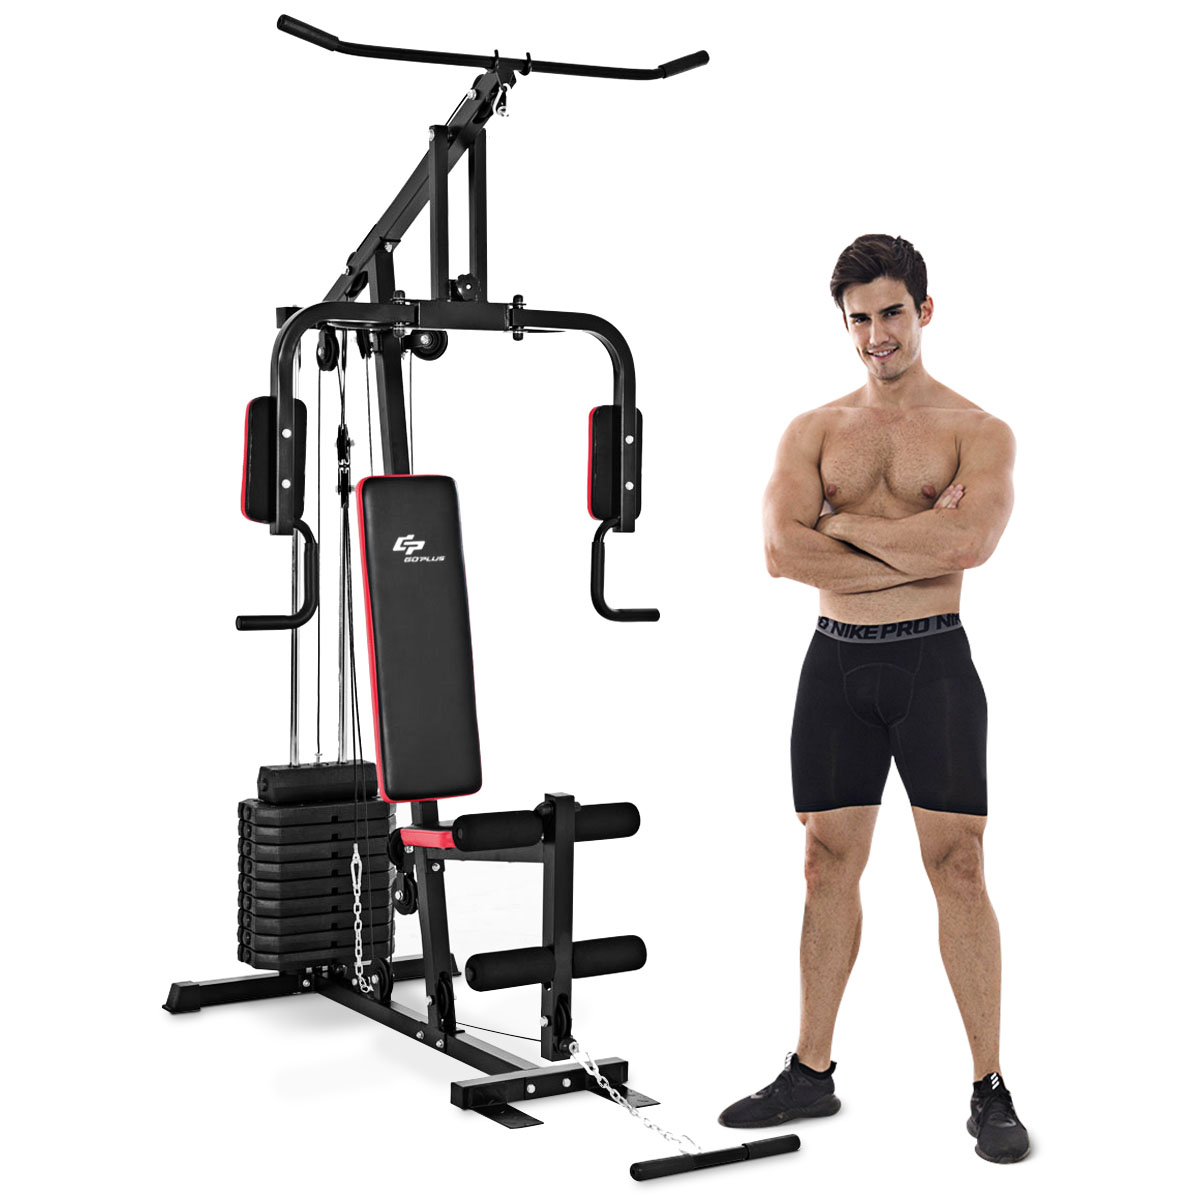 Costway Multifunction Cross Trainer Workout Machine Strength Training Fitness Exercise - image 1 of 9